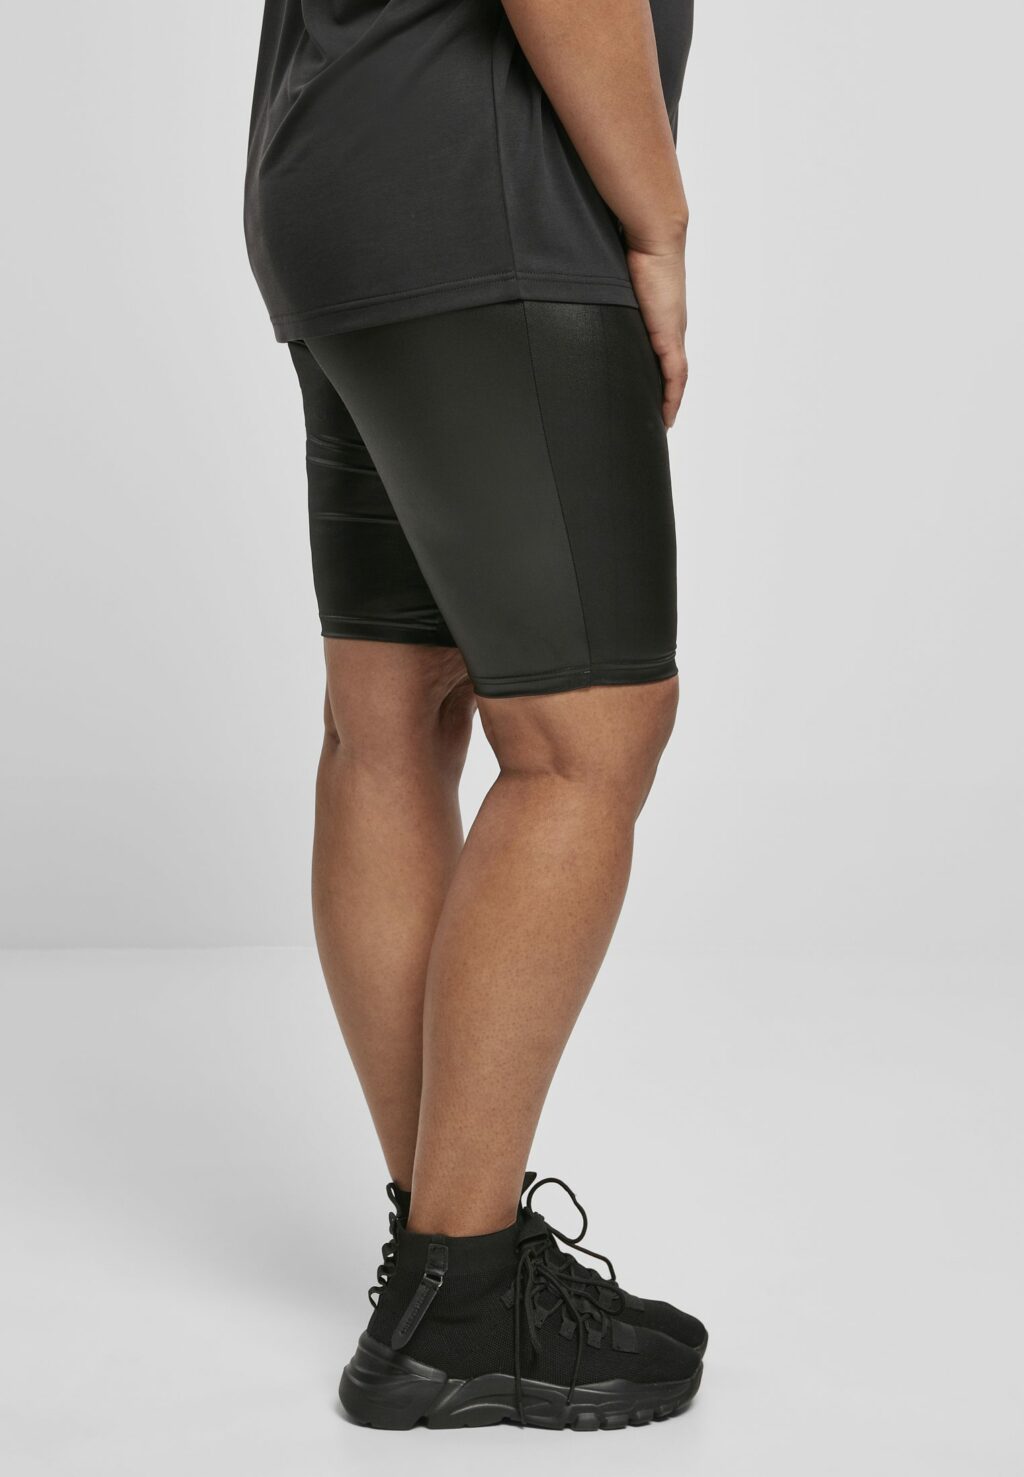 Urban Classics Ladies Synthetic Leather Cycle Shorts black TB4078